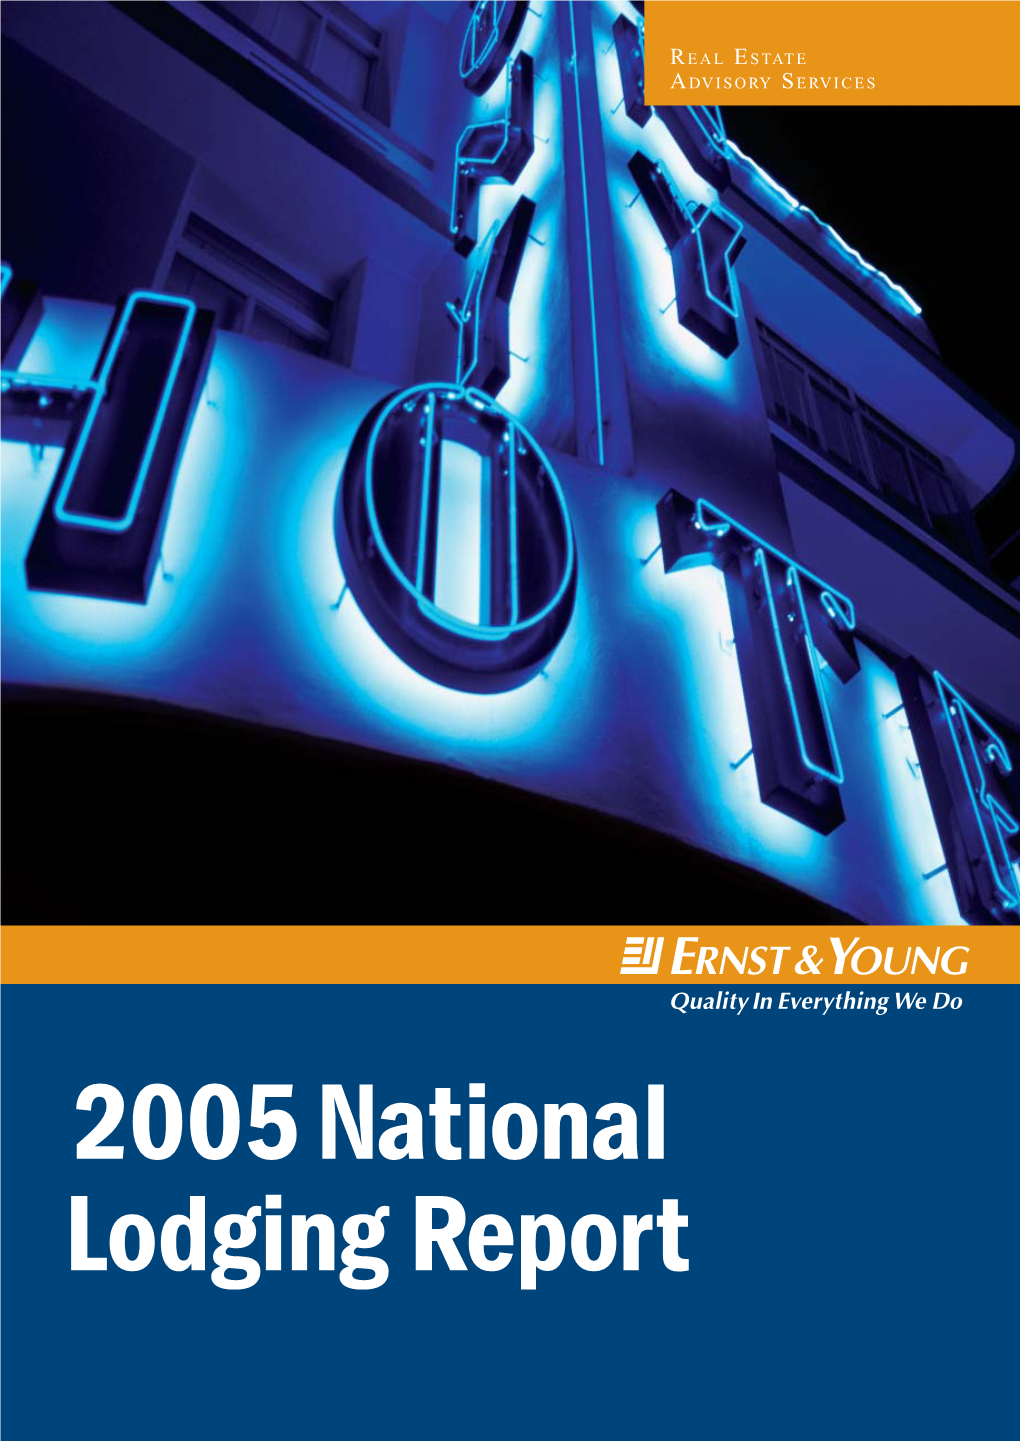 2005 National Lodging Report